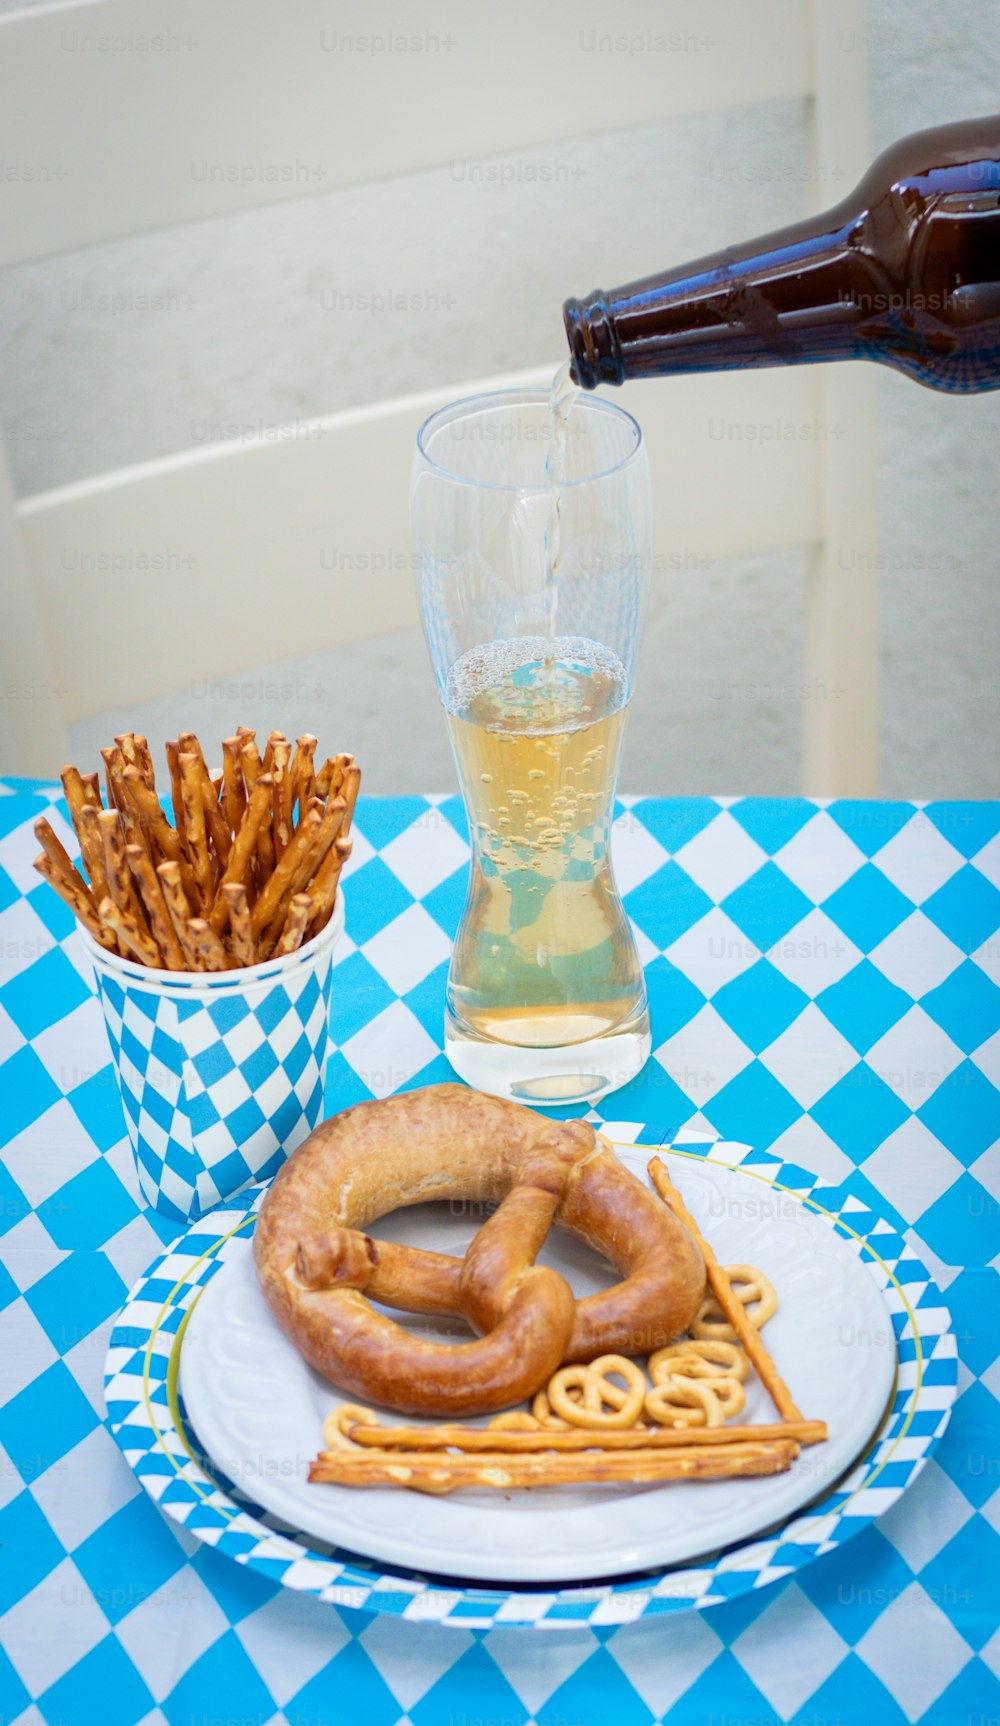 a plate of pretzels and a glass of beer